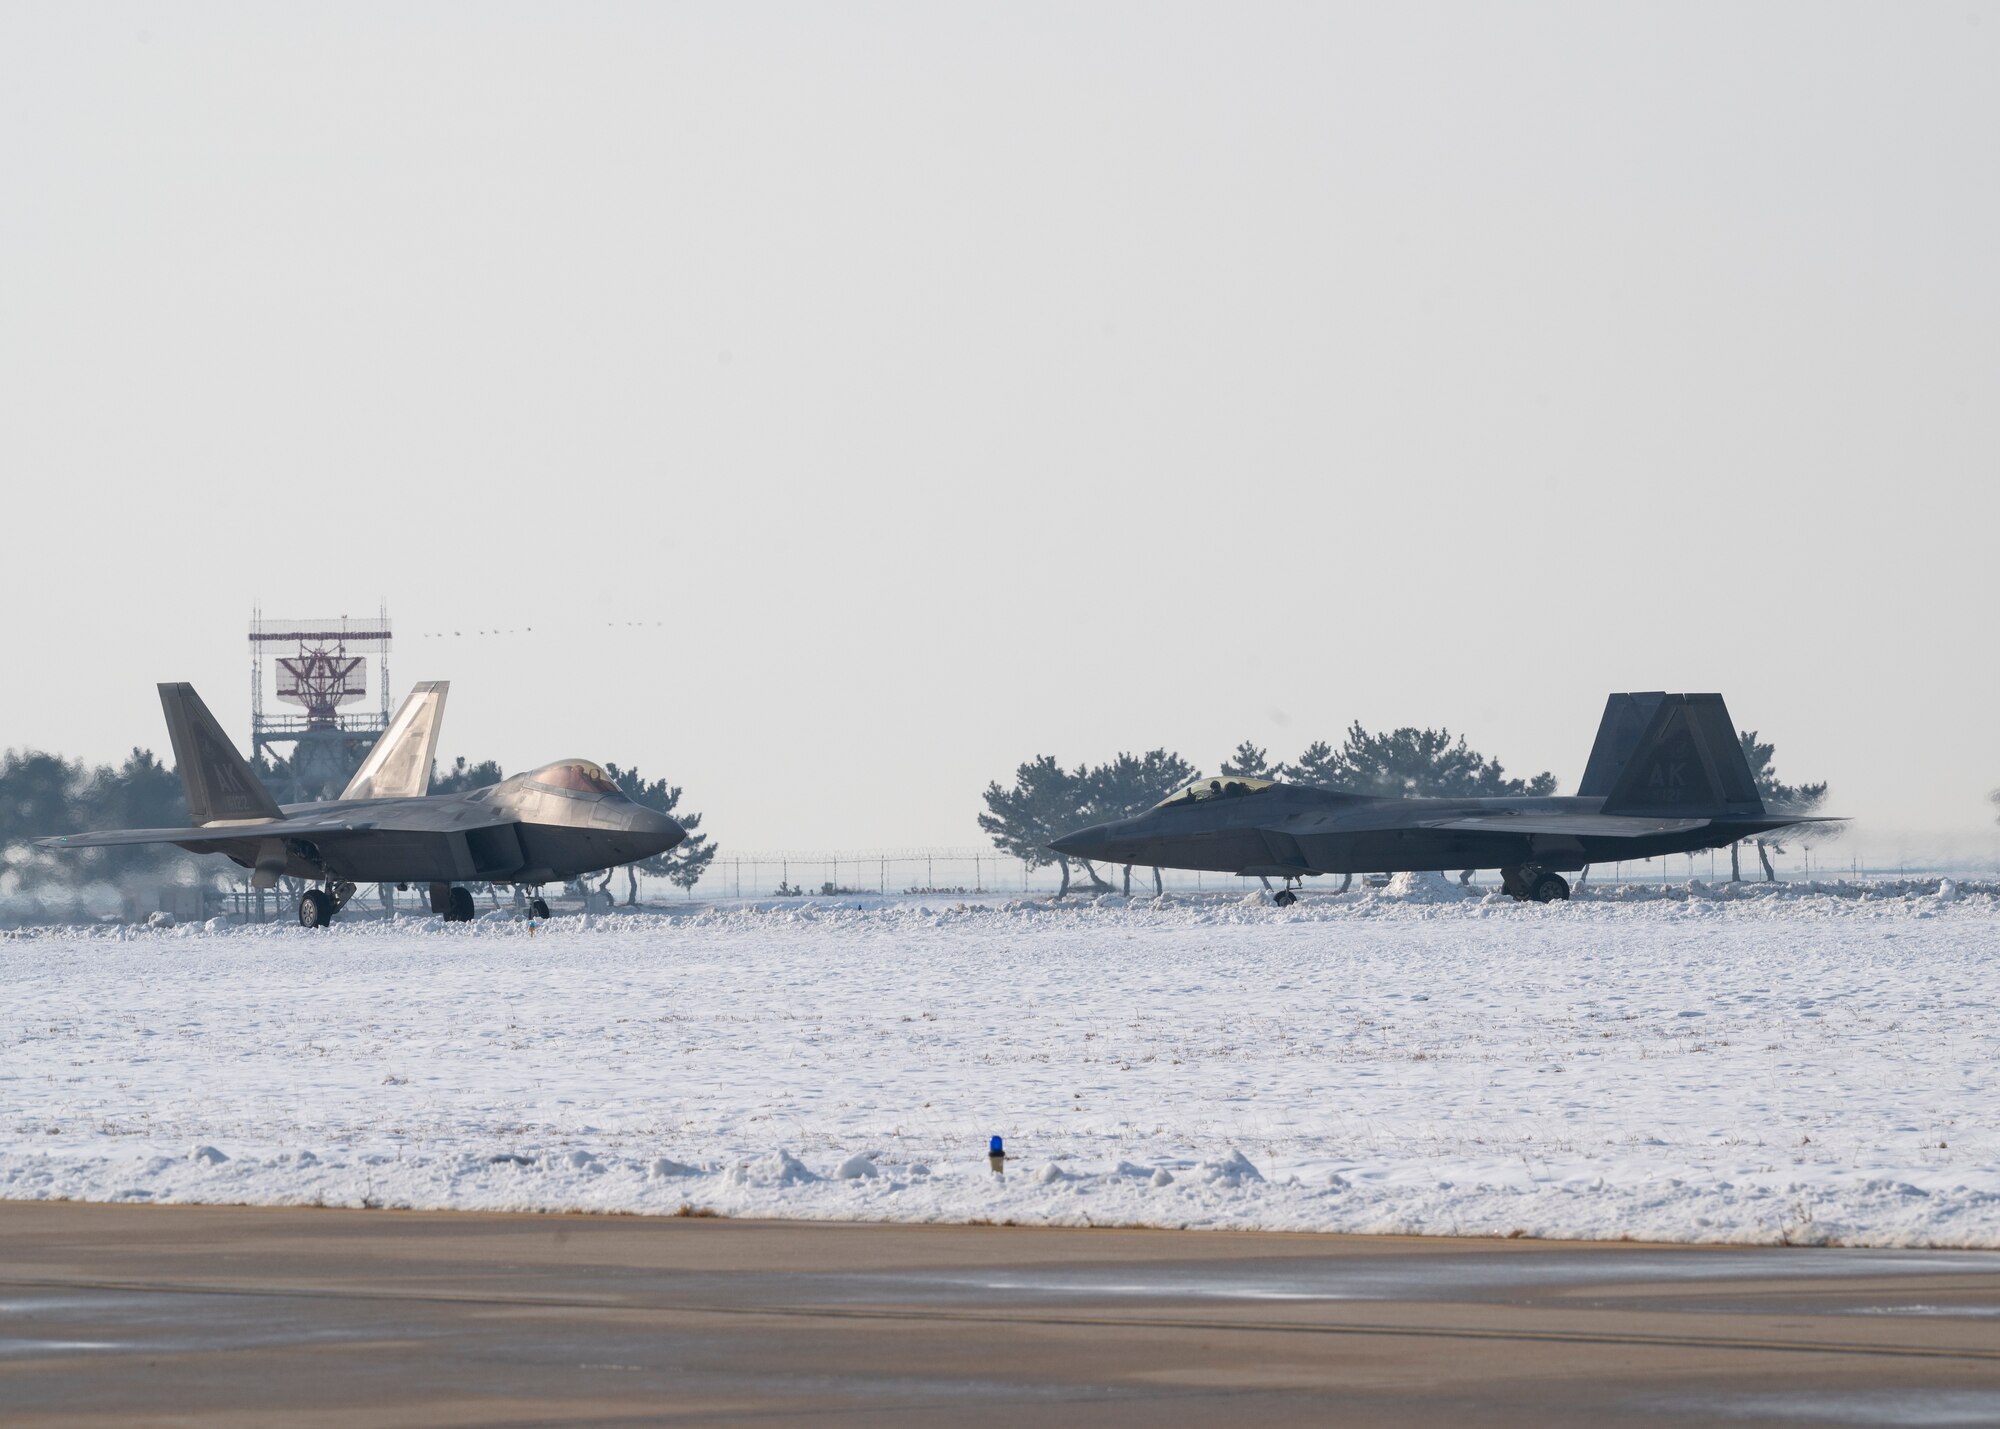 Two F-22 Raptors assigned to the 525th Fighter Squadron out of Joint-Base Elmendorf-Richardson, Alaska, arrive at Kunsan Air Base, Republic of Korea, Dec. 20, 2022.